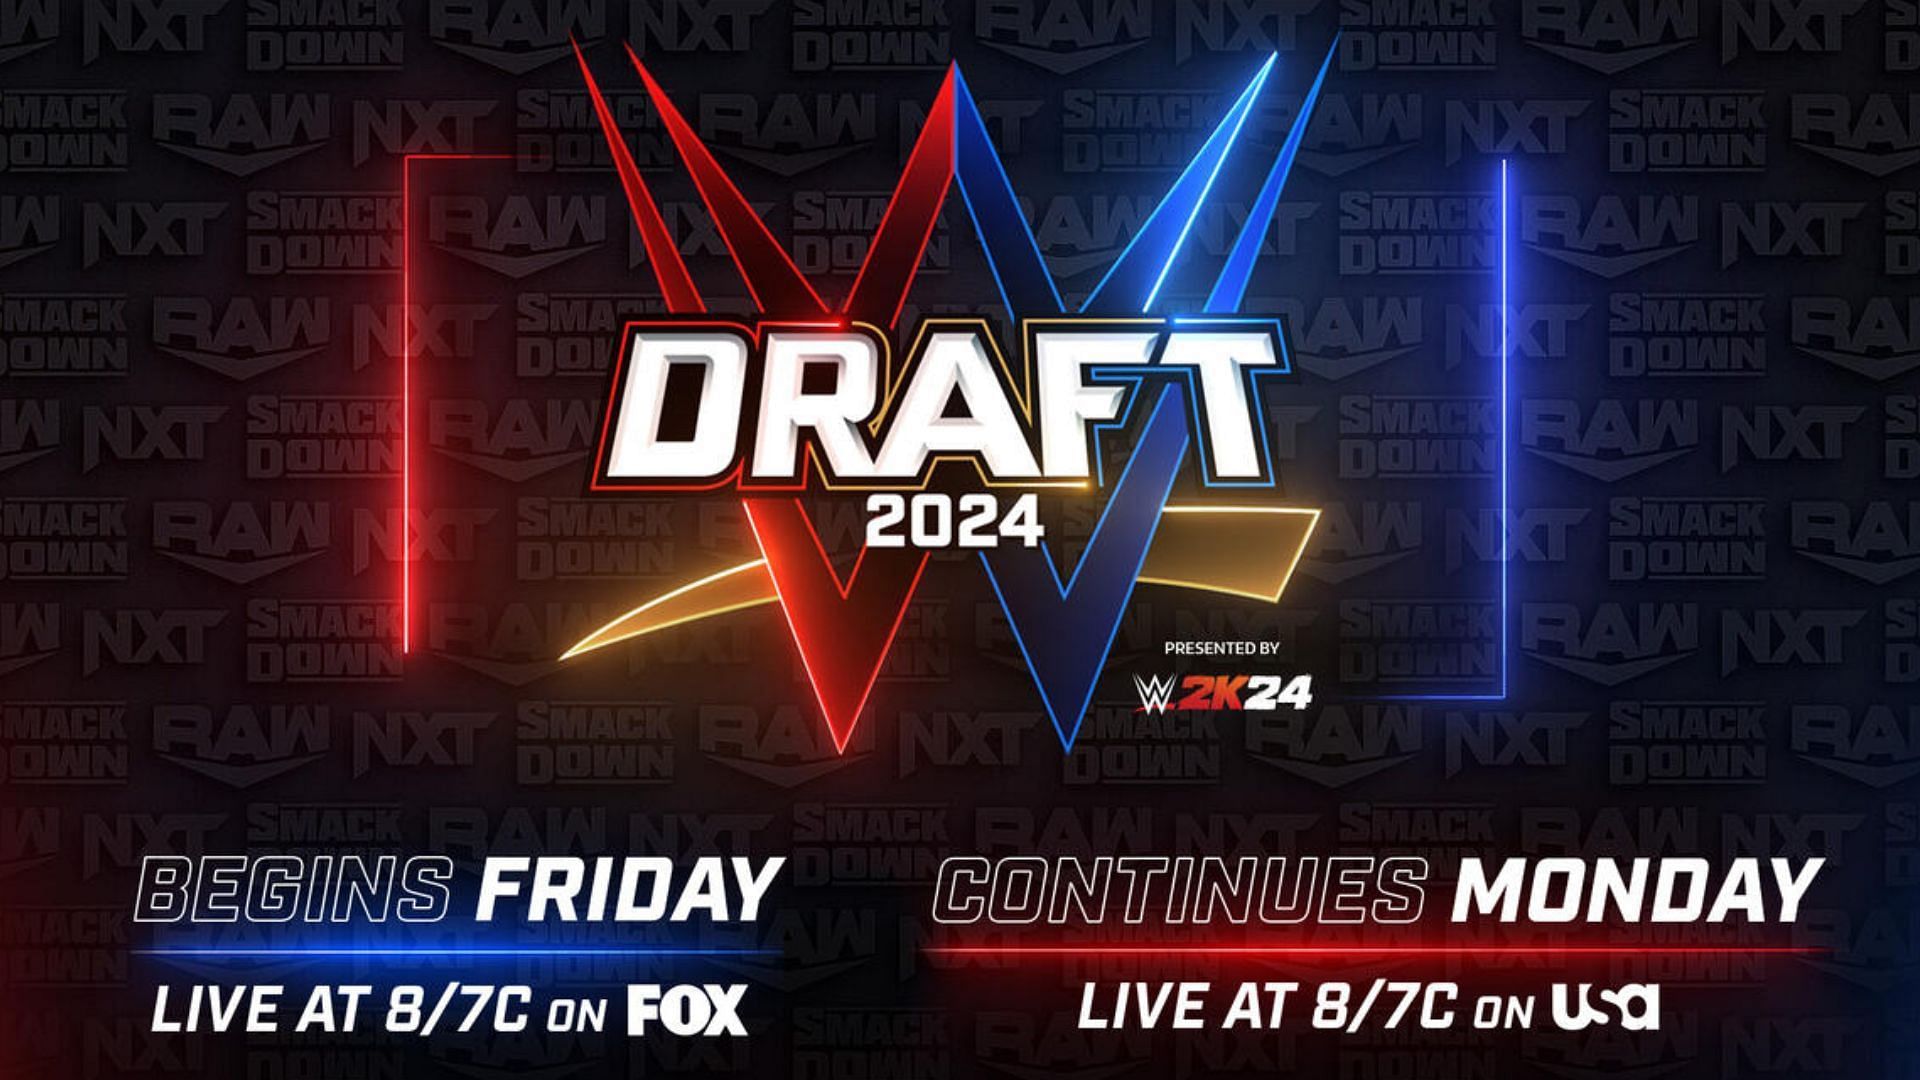 The draft is finally almost here and will begin this Friday night.